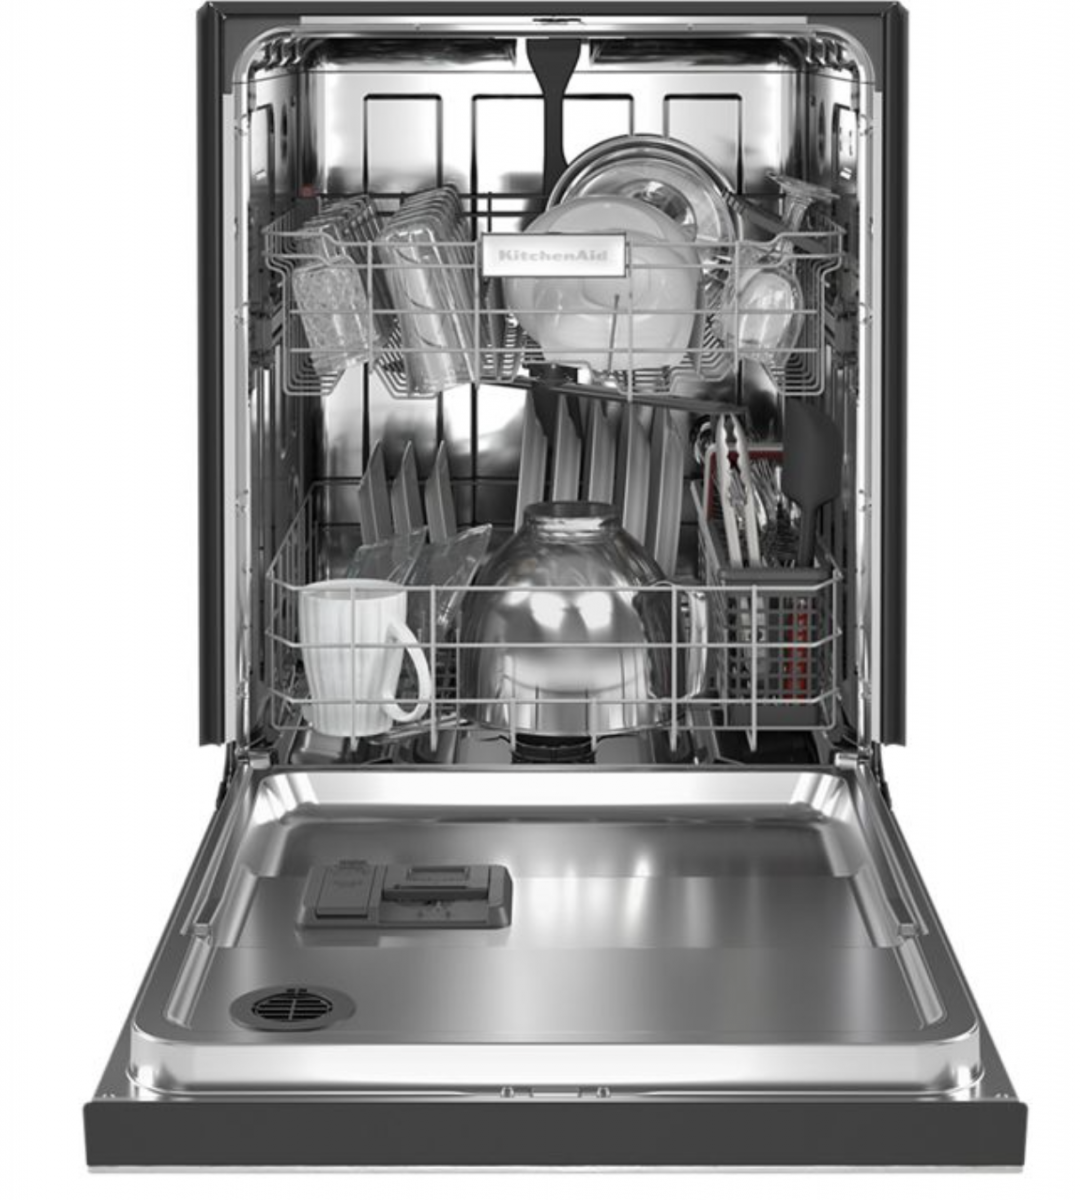 Find dishwasher deals with our KitchenAid coupons